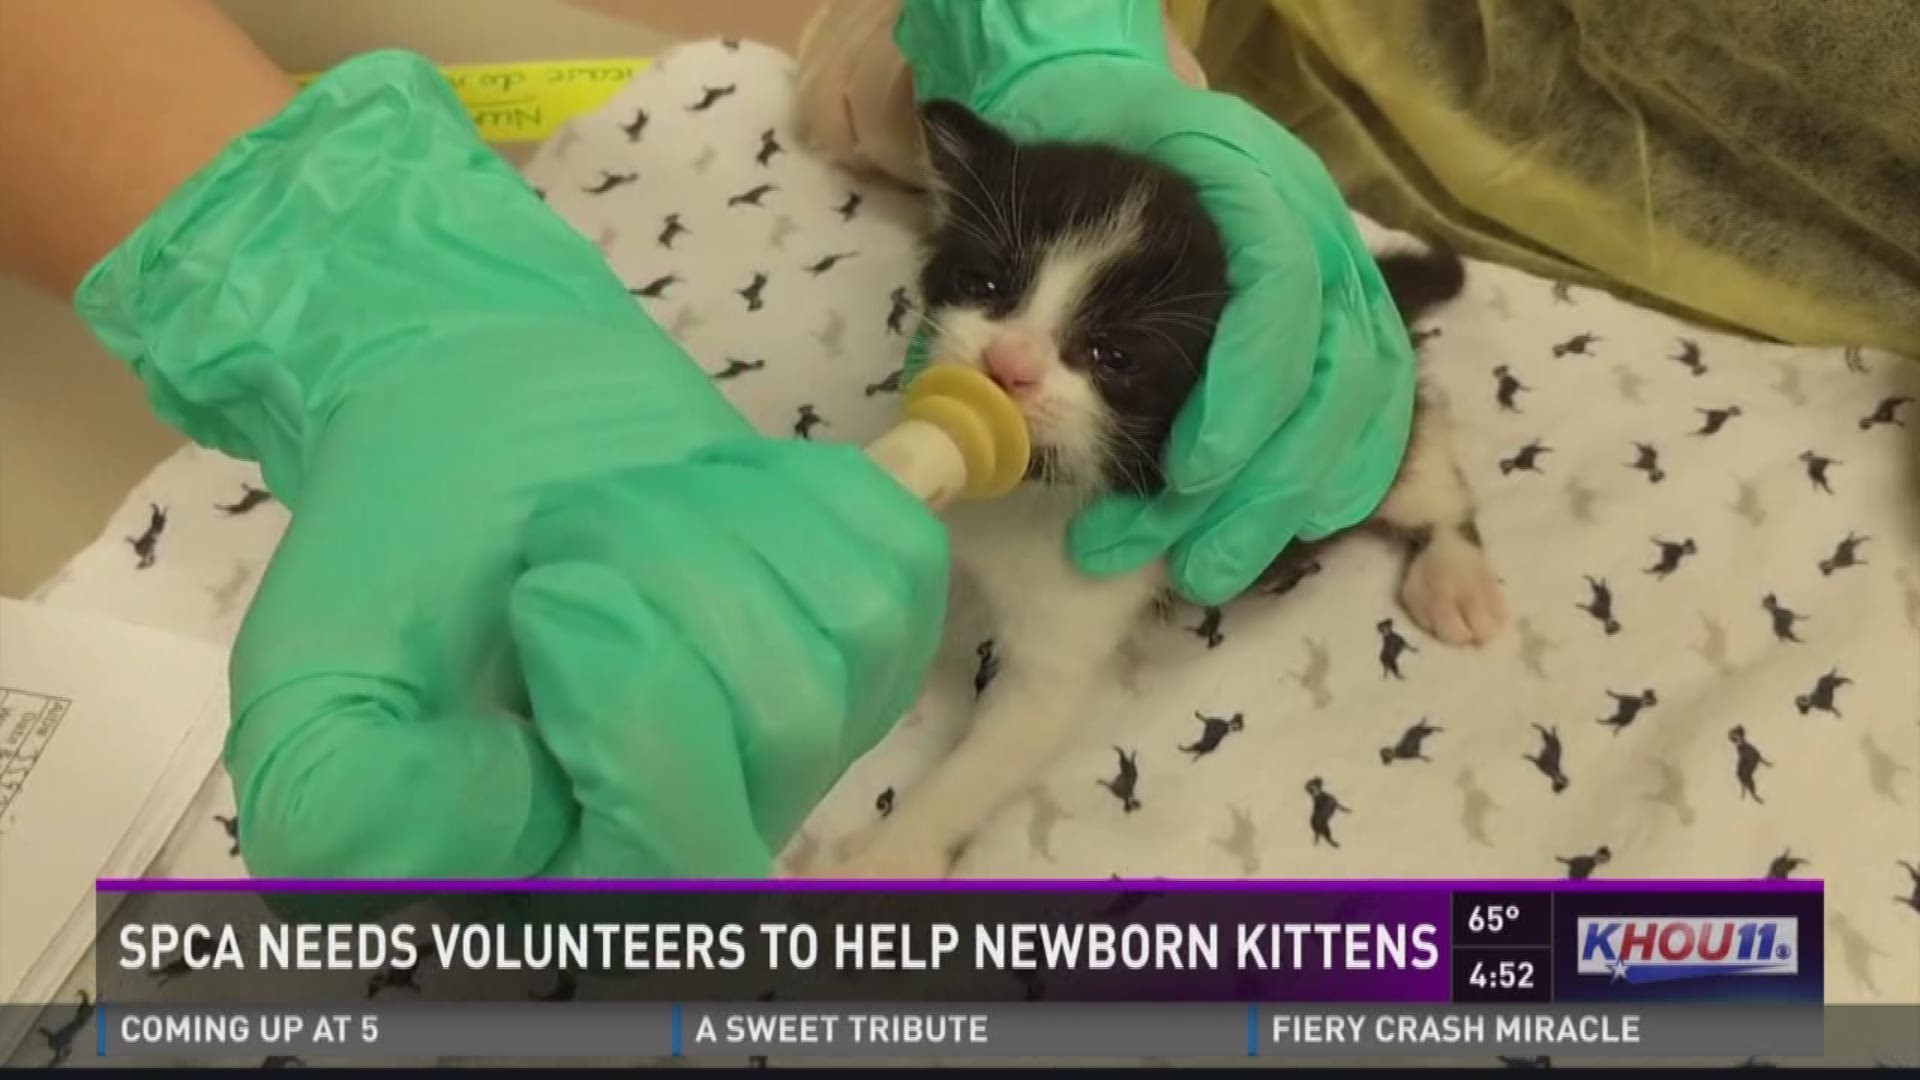 The Houston SPCA has received dozens of newborn kittens and are asking for the public's help in caring for the animals and adopting them. 